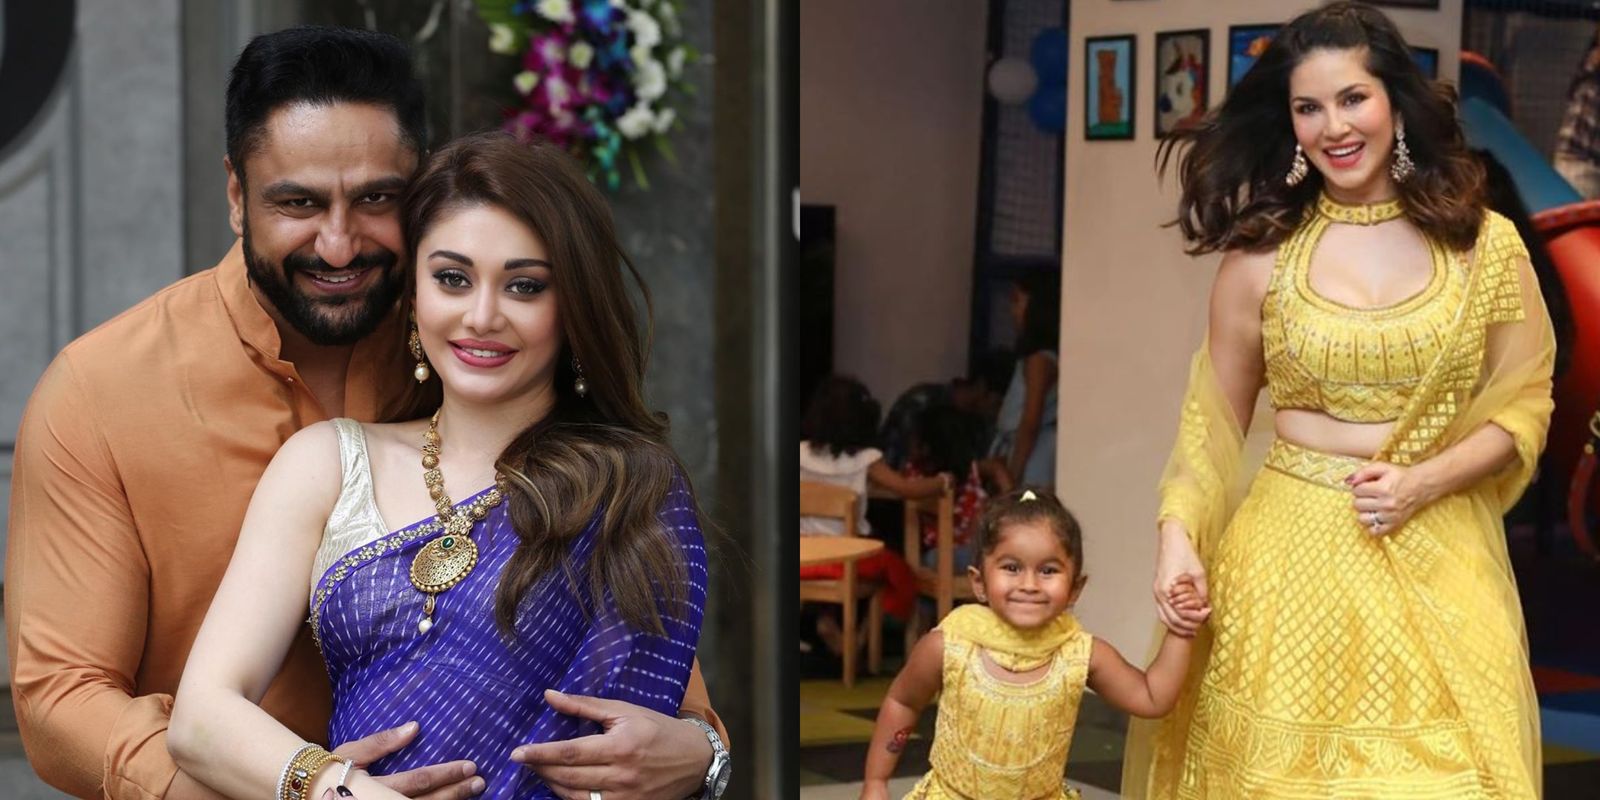 Shefali Jariwala Reveals She's Adopting A Baby Girl After Being Inspired By Sunny Leone, Calls The Adoption Process 'Tedious'